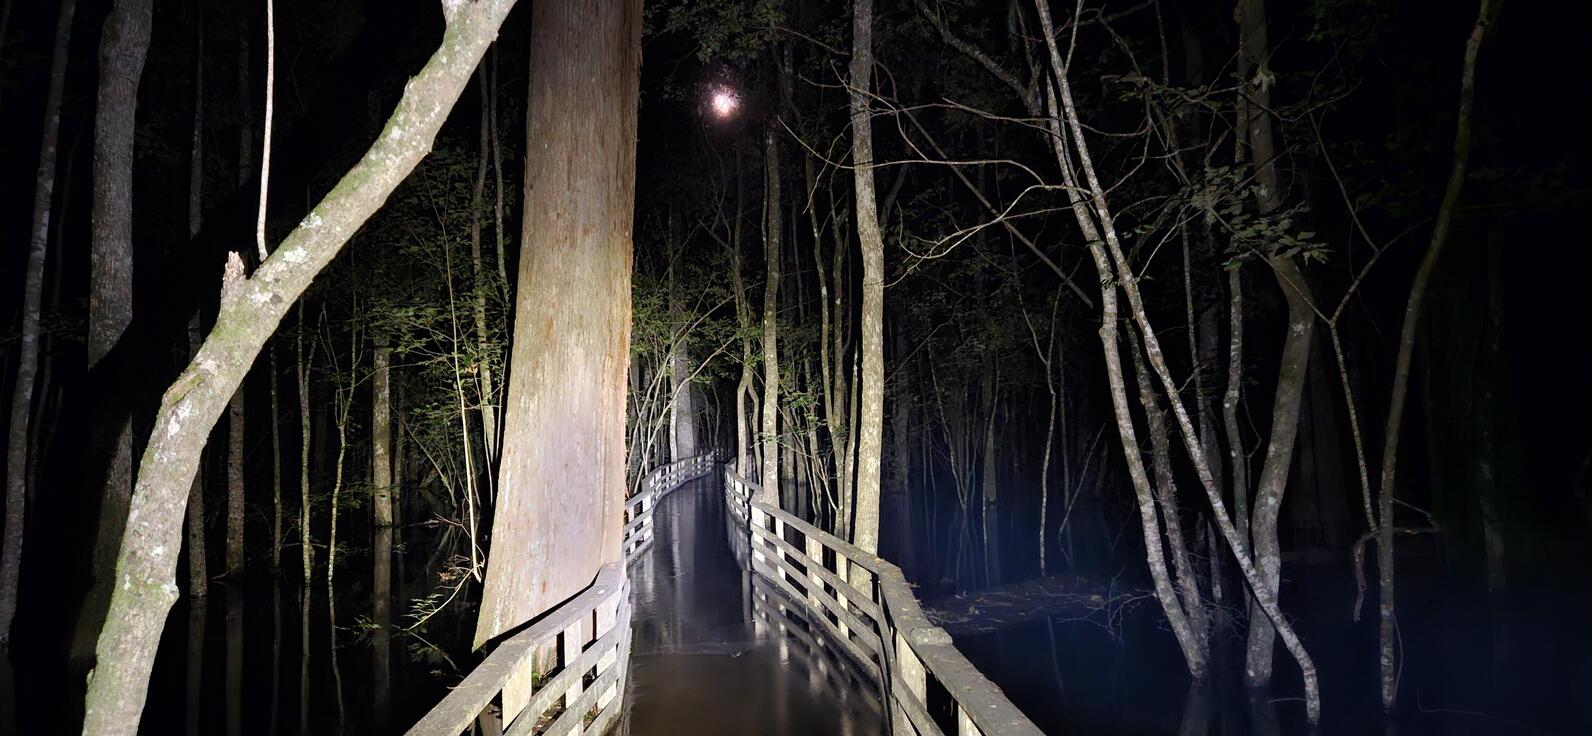 The boardwalk trails off into obscurity, a few inches of water flowing over the deck. A large cypress tree rises on the left, its wide base entirely submerged. Through the trees the moon shines through.